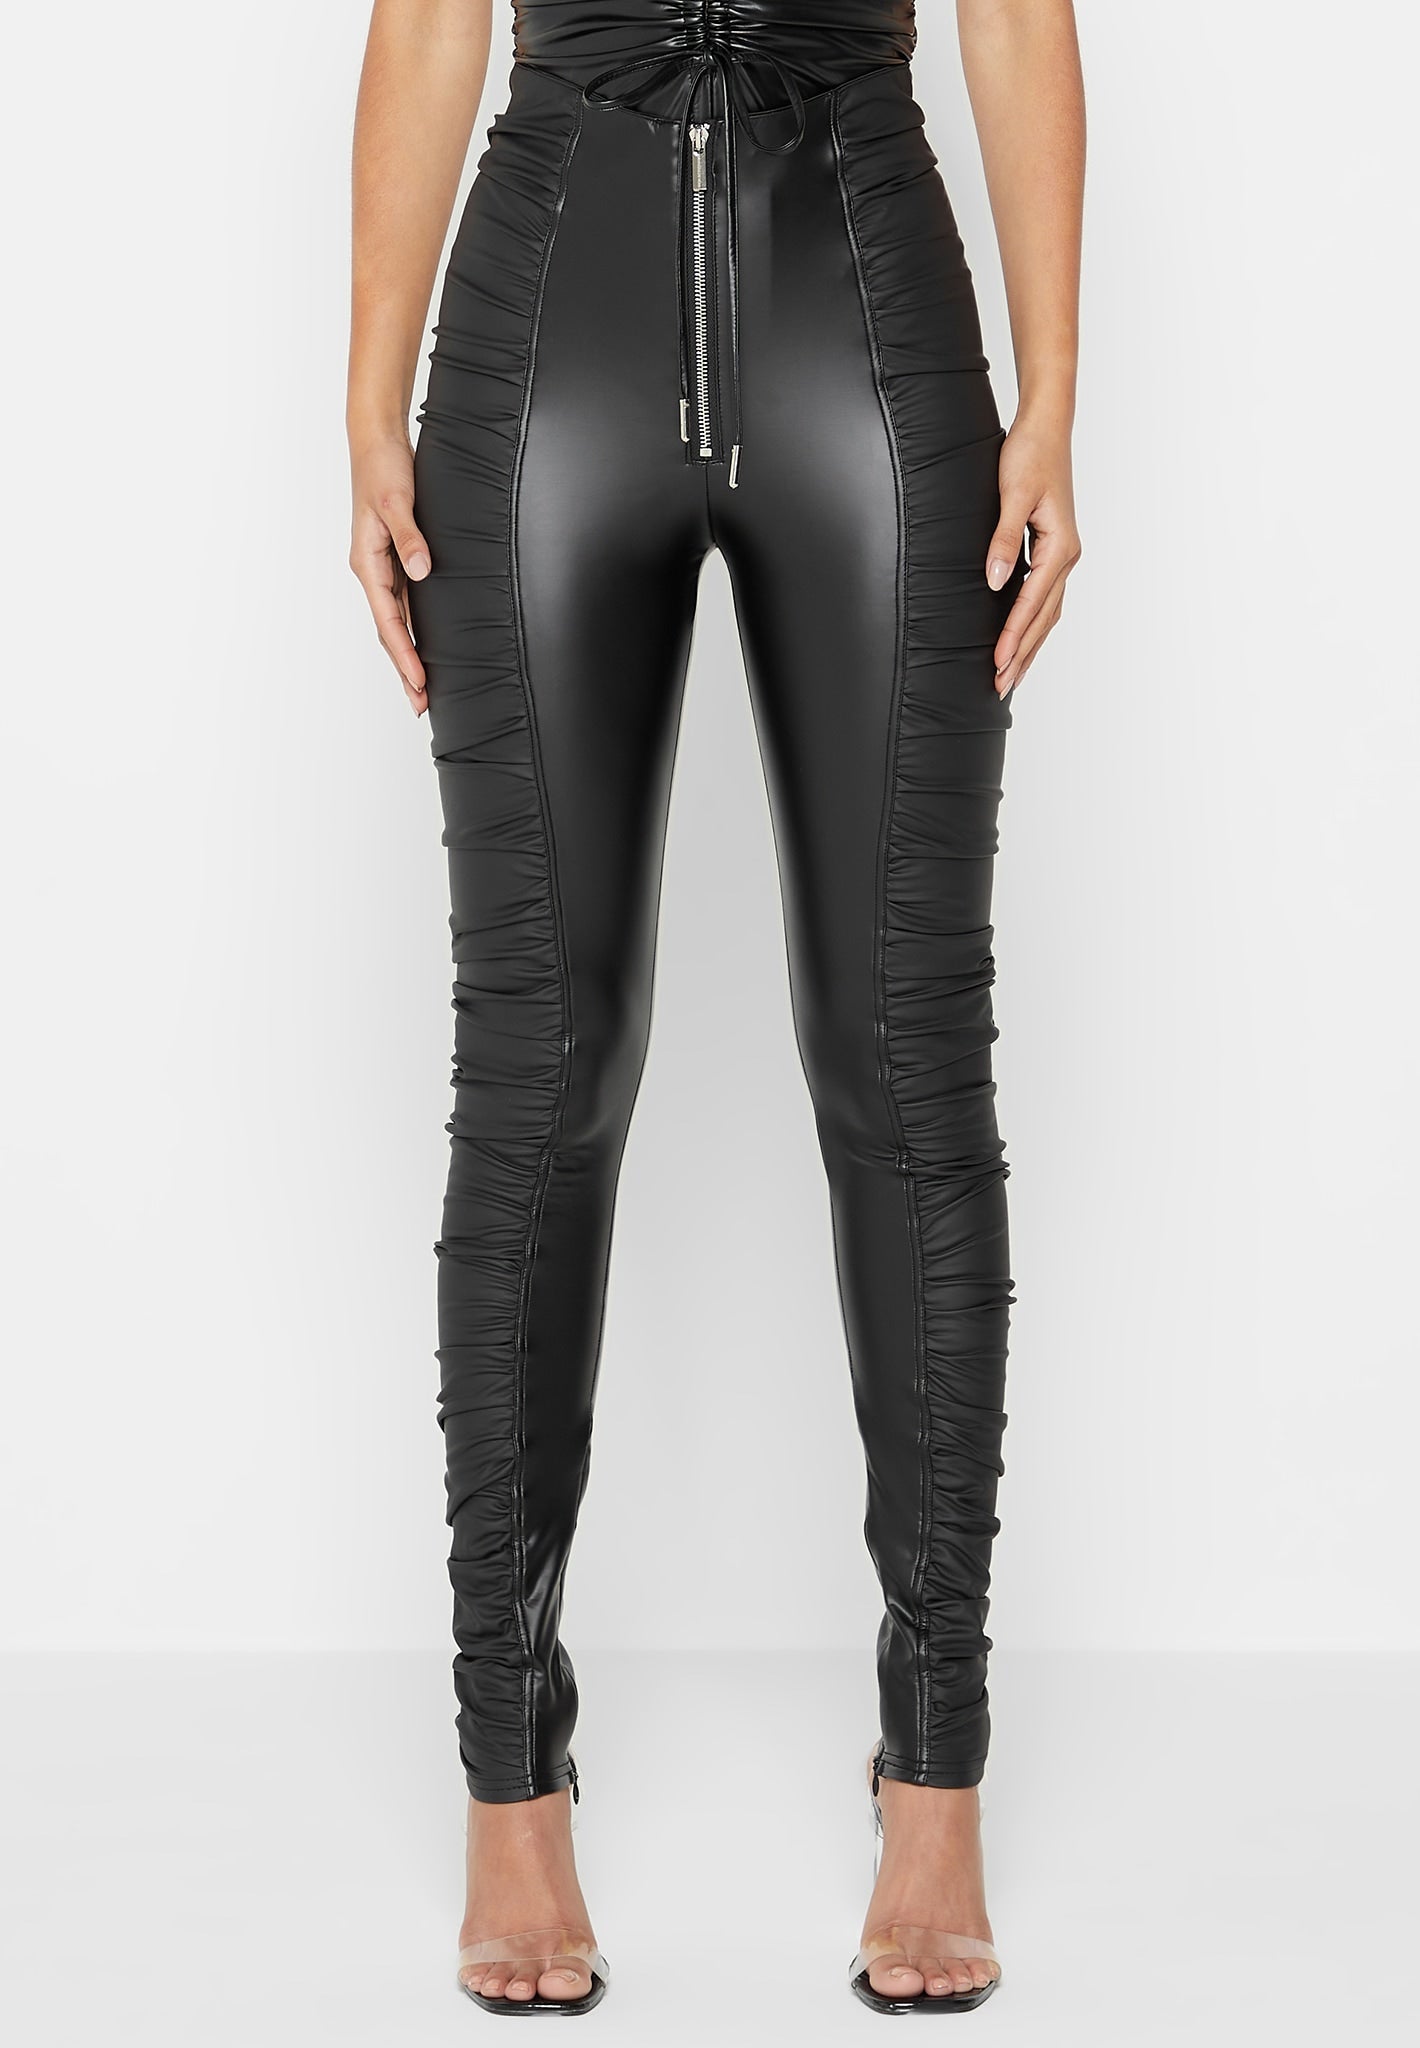 Womens Black Leather Pants In Canada